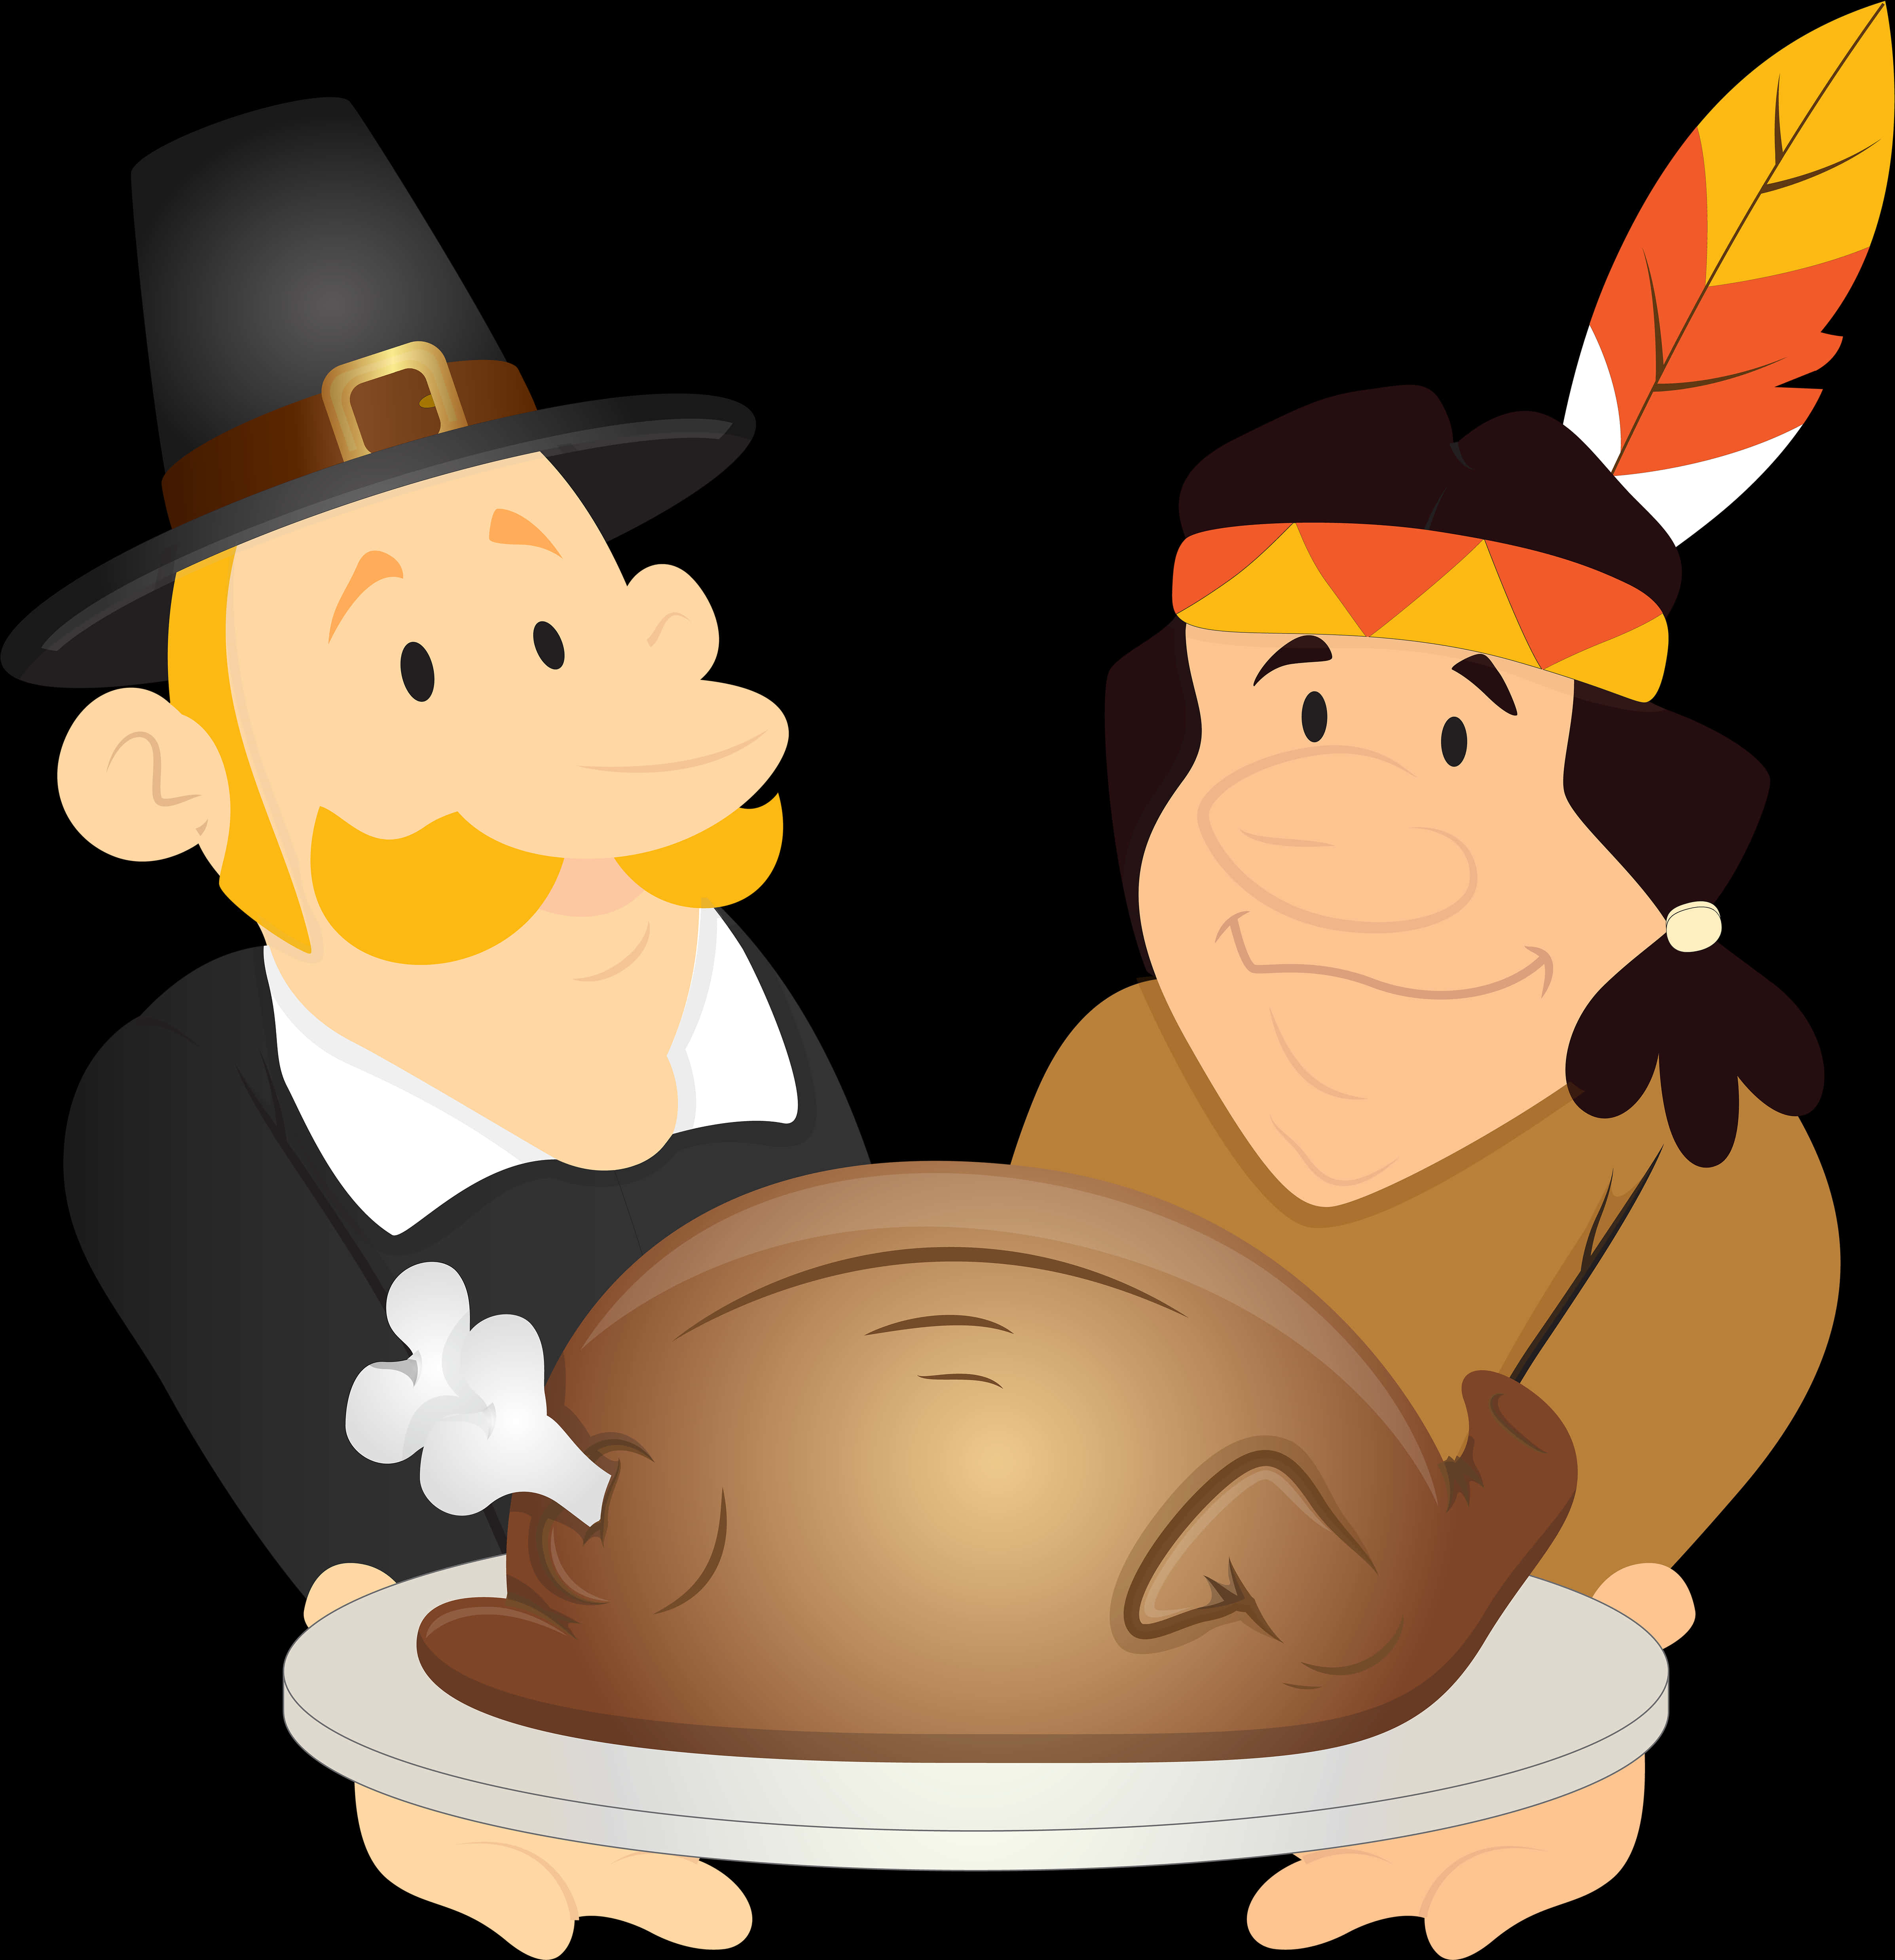 Cartoon Of A Man And Woman Holding A Turkey